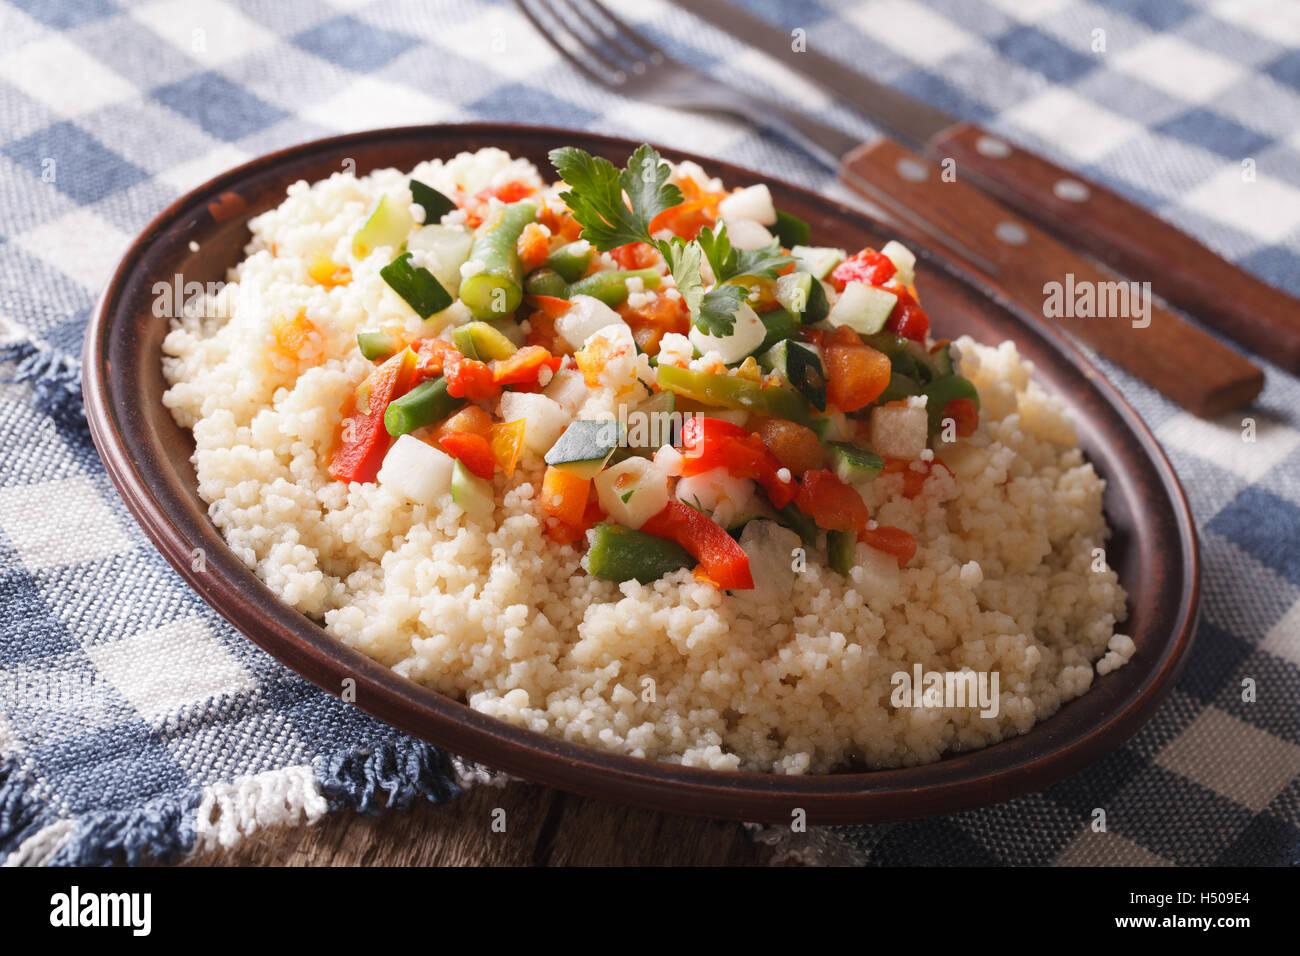 Arabian Food: Cous Cous with vegetables close-up on a plate. horizontal Stock Photo